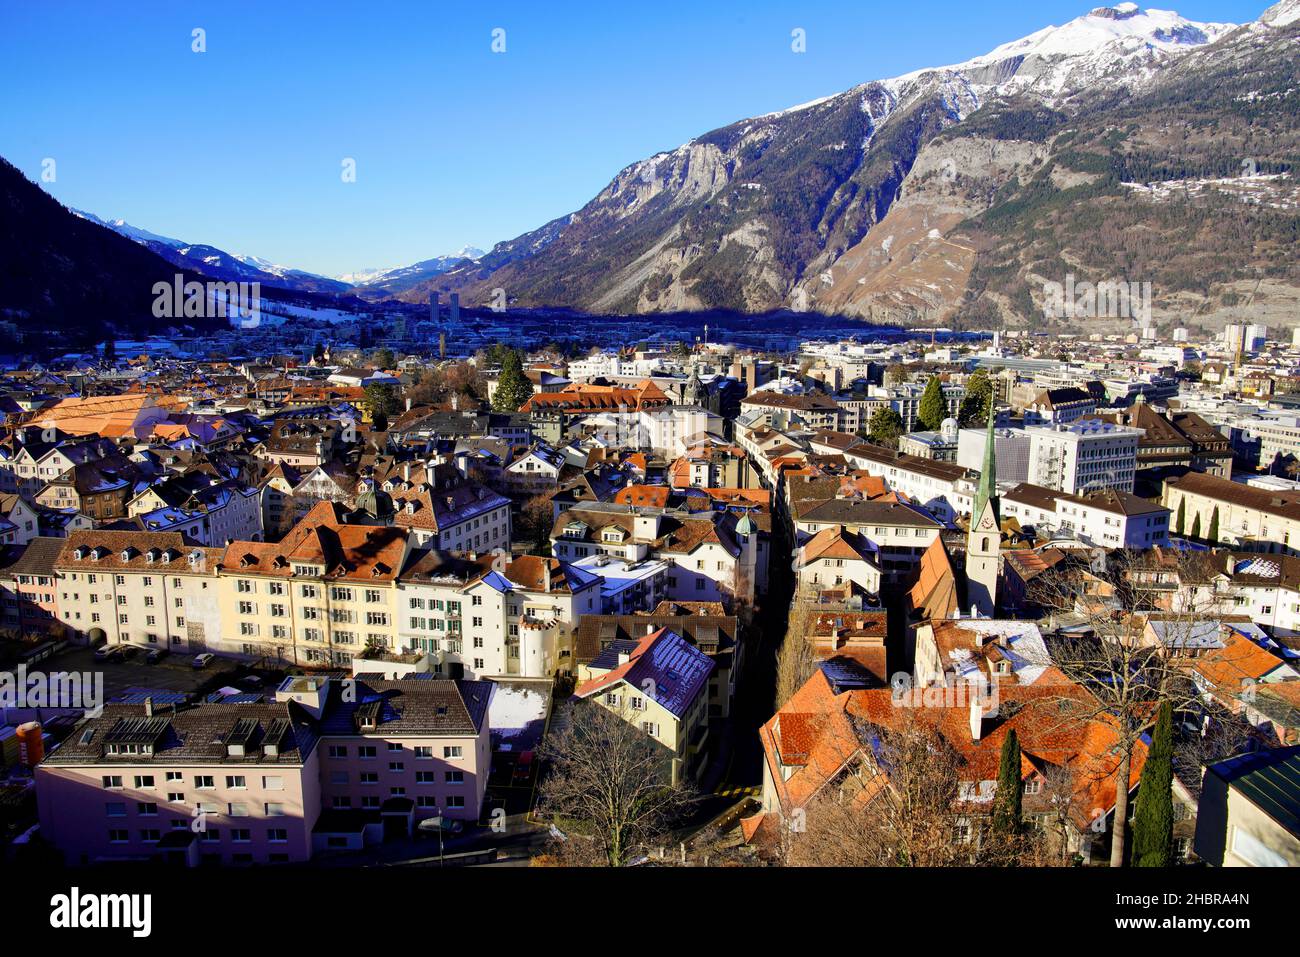 Elevated view of Chur Old Town in Swiss Alps.  Canton of Graubünden (Grisons), S witzerland. Stock Photo